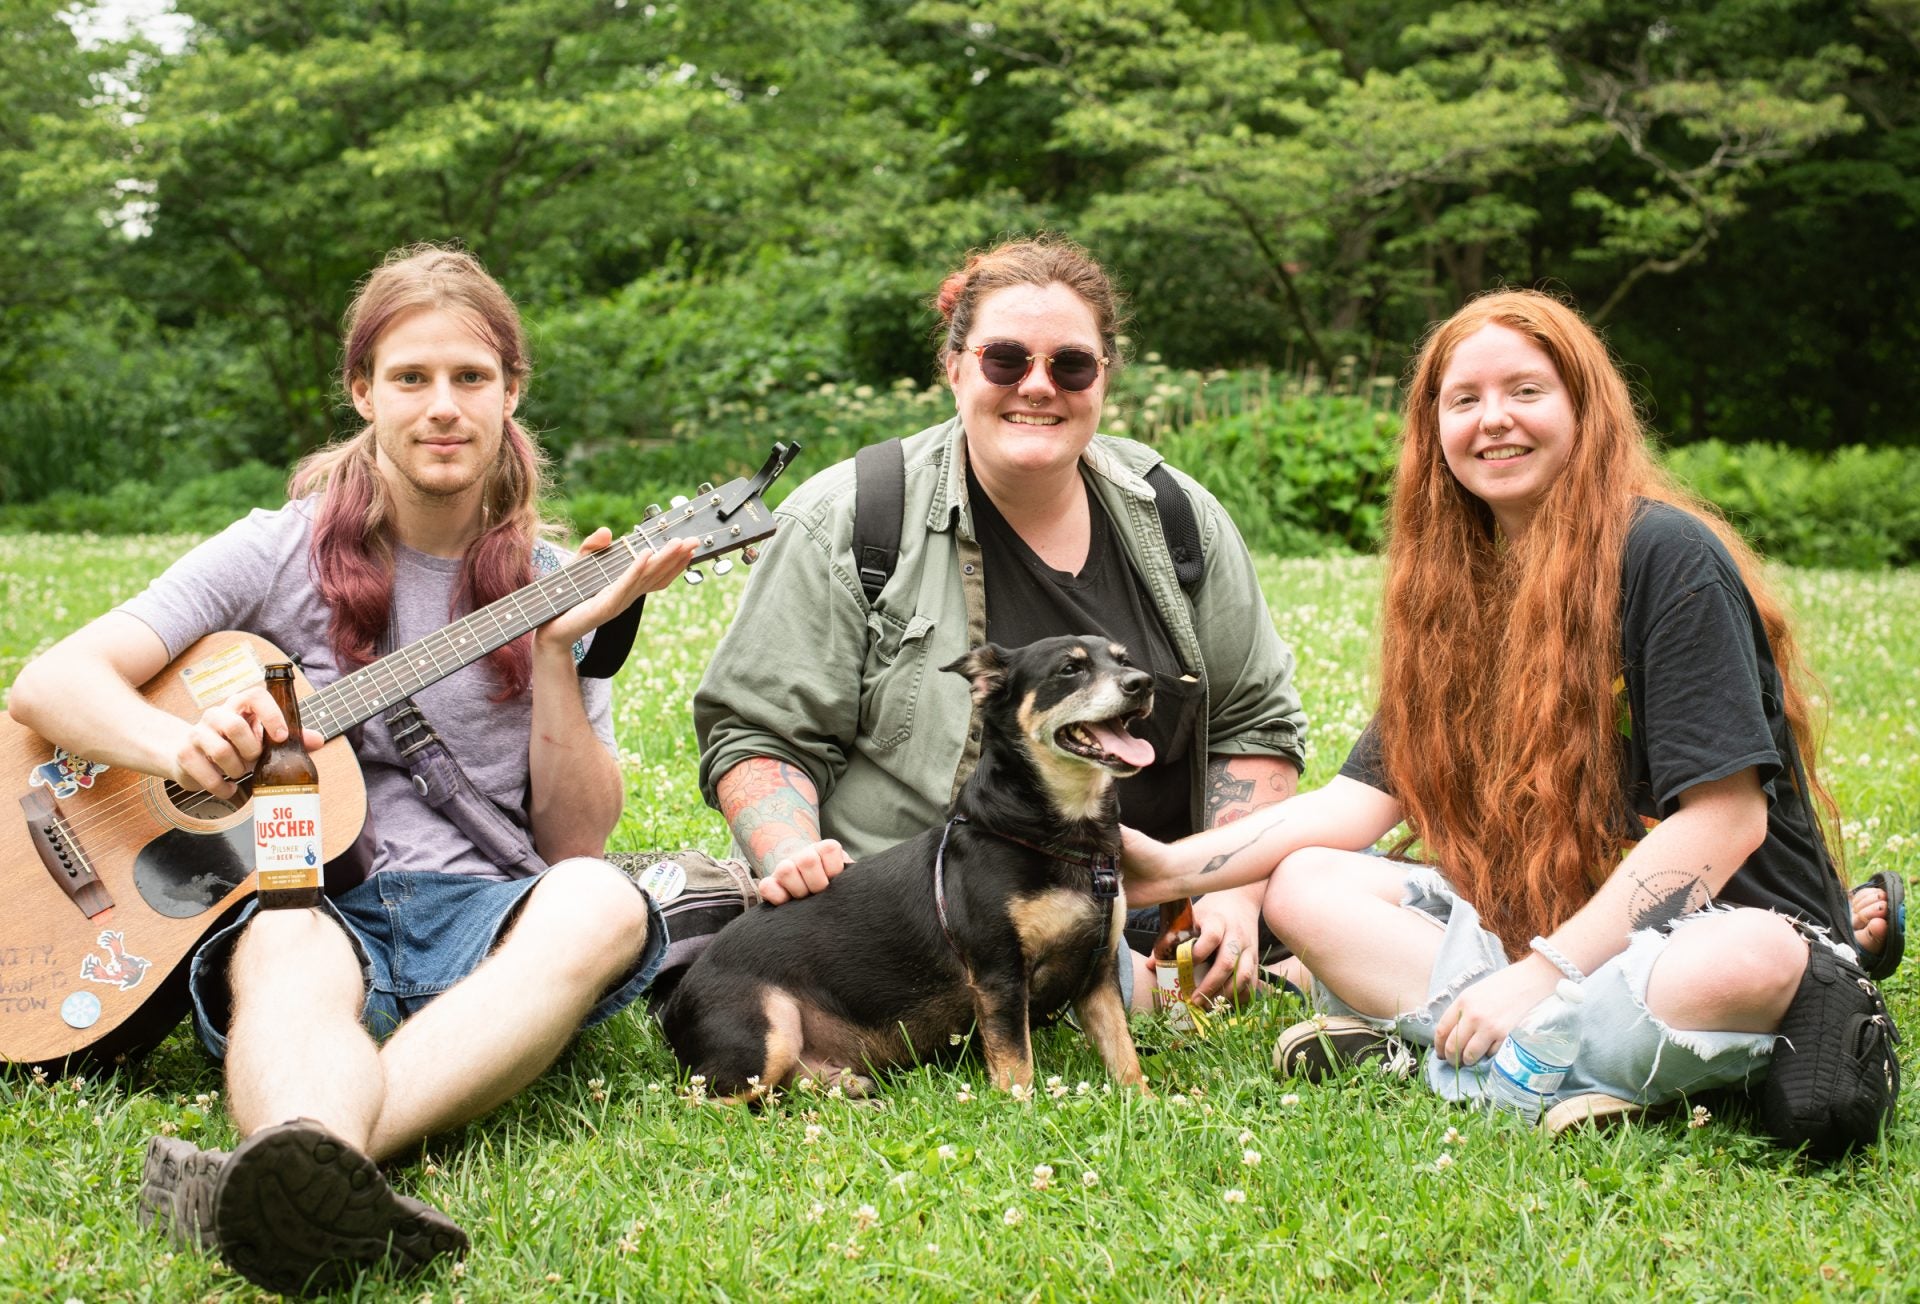 Snapped: Liberty Hall hosts Barks and Brews, June 6, 2019